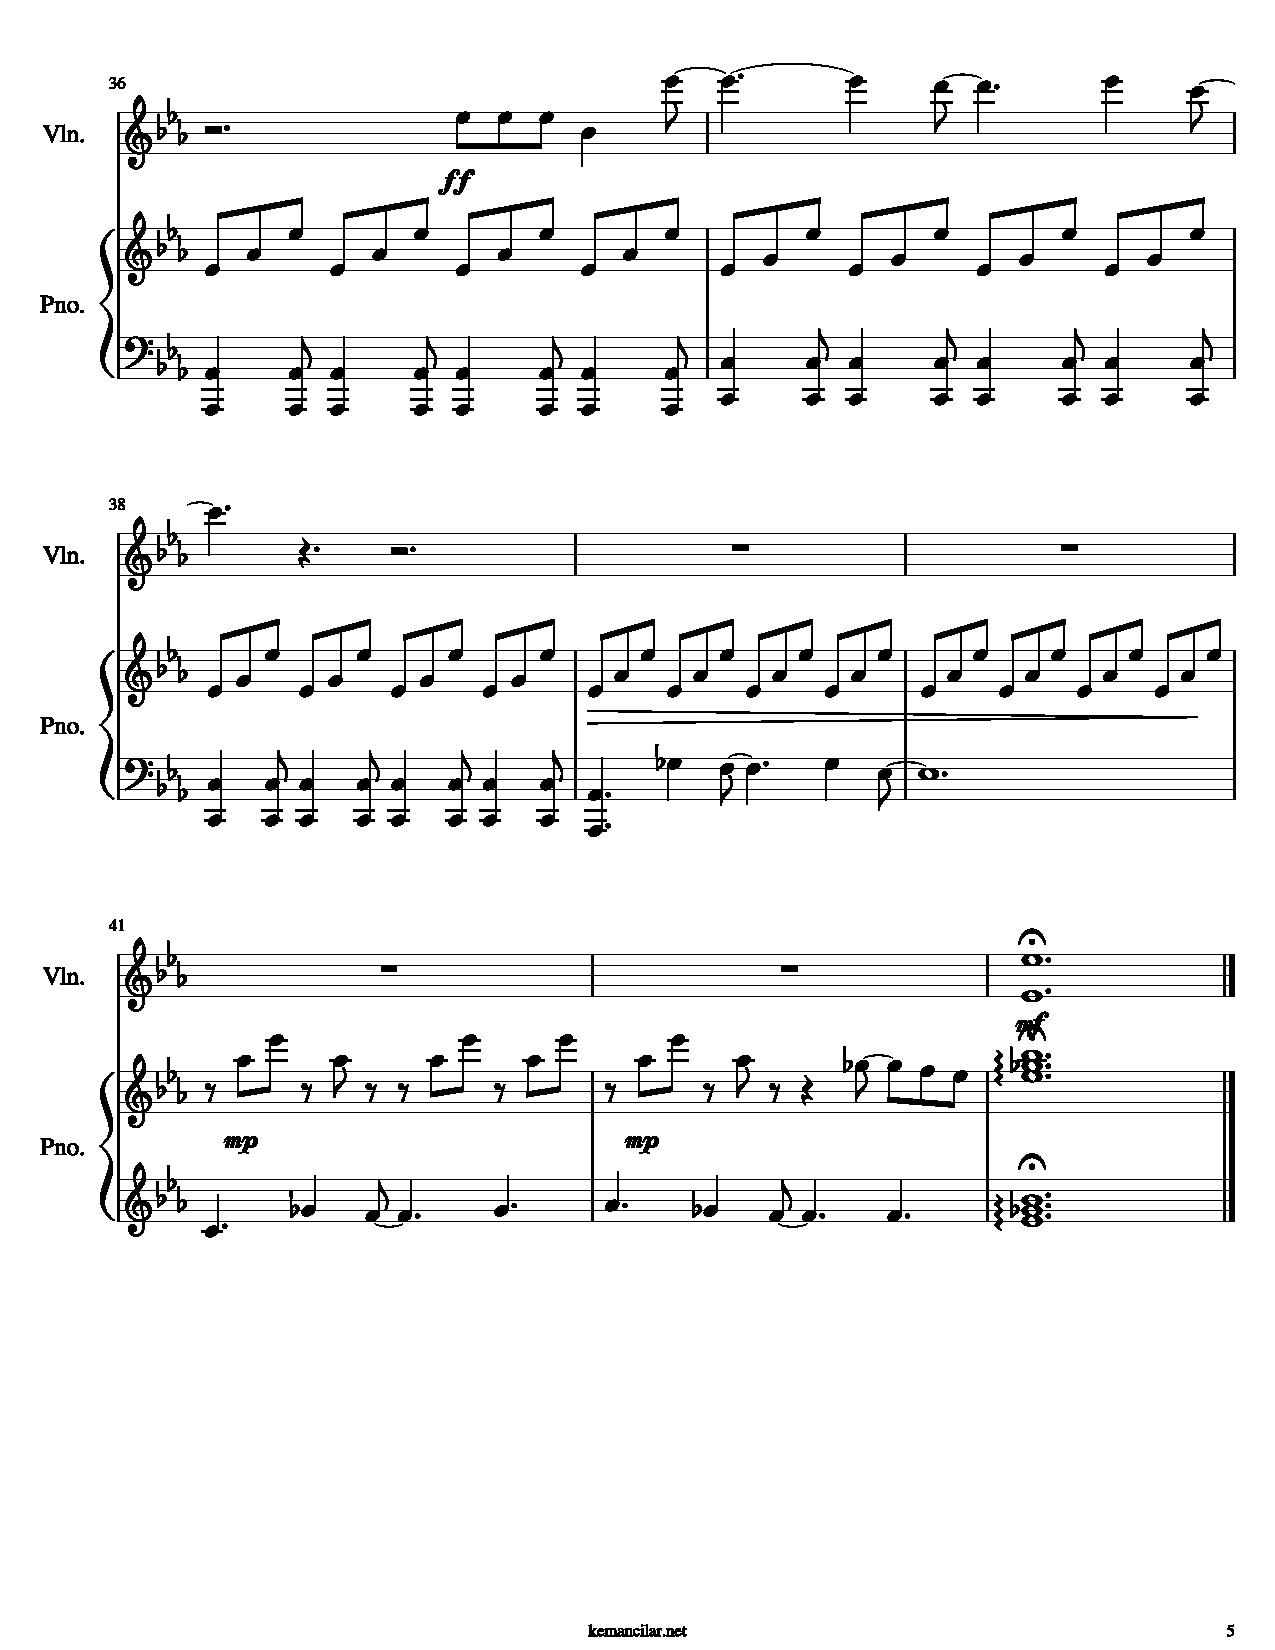 into the unknown piano sheet music